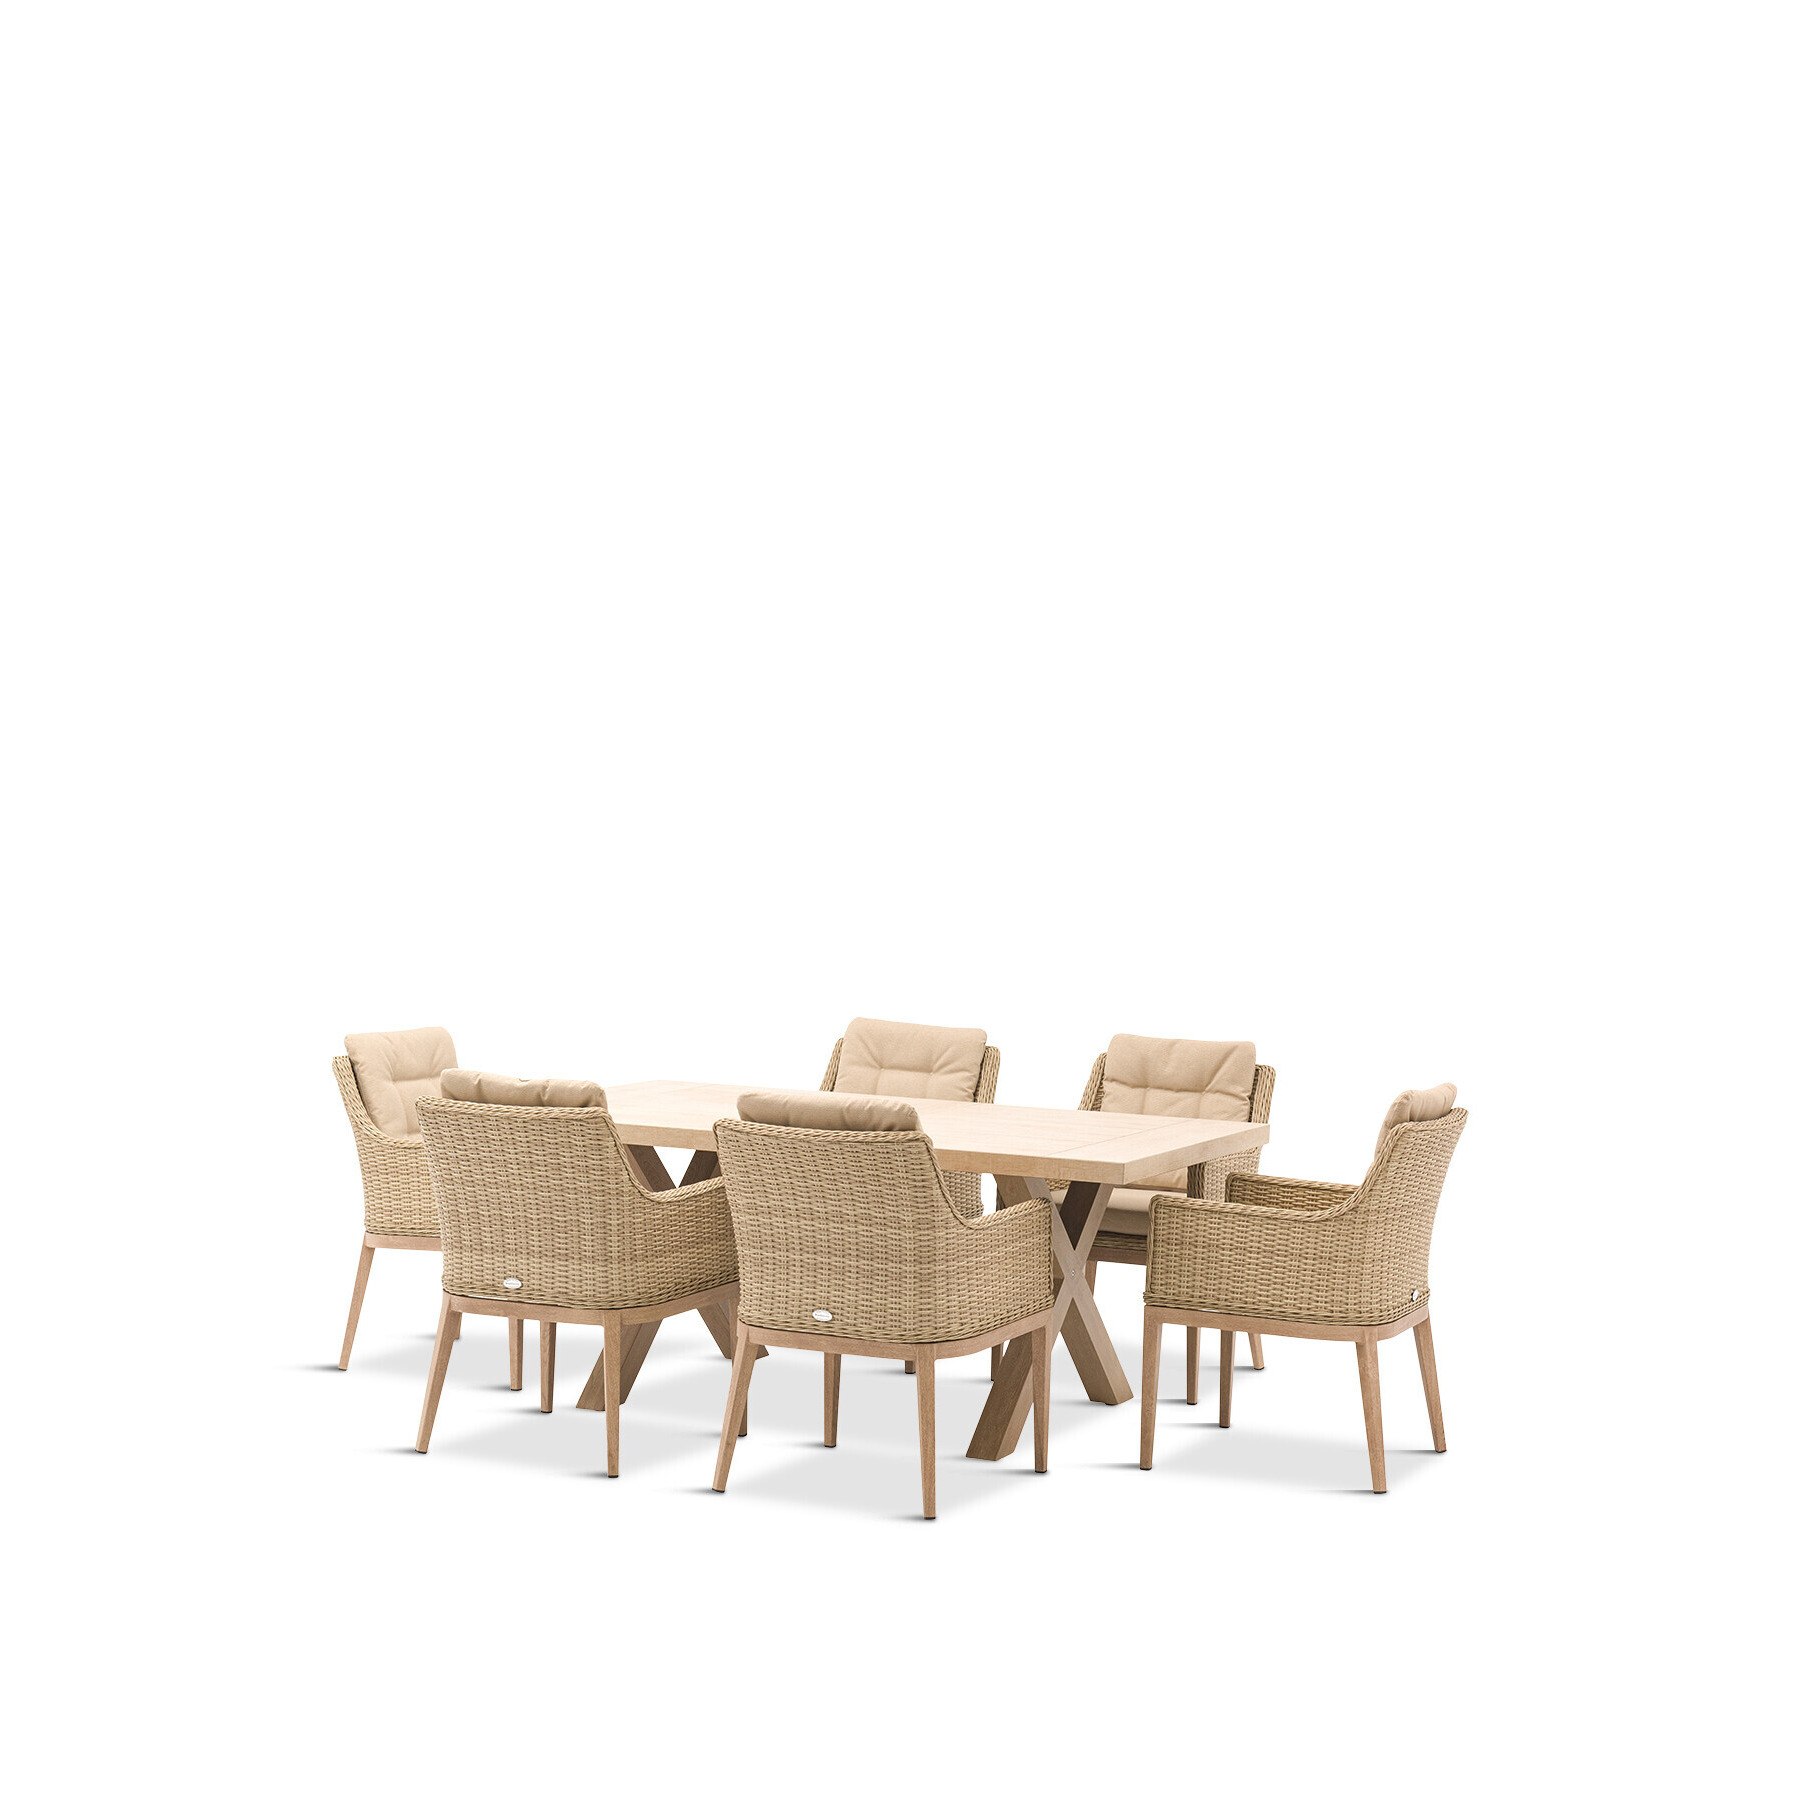 Bramblecrest Monterey Vogue 6 Seat Dining Set with Ceramic Dining Table & 6 Armchairs Neutral - image 1